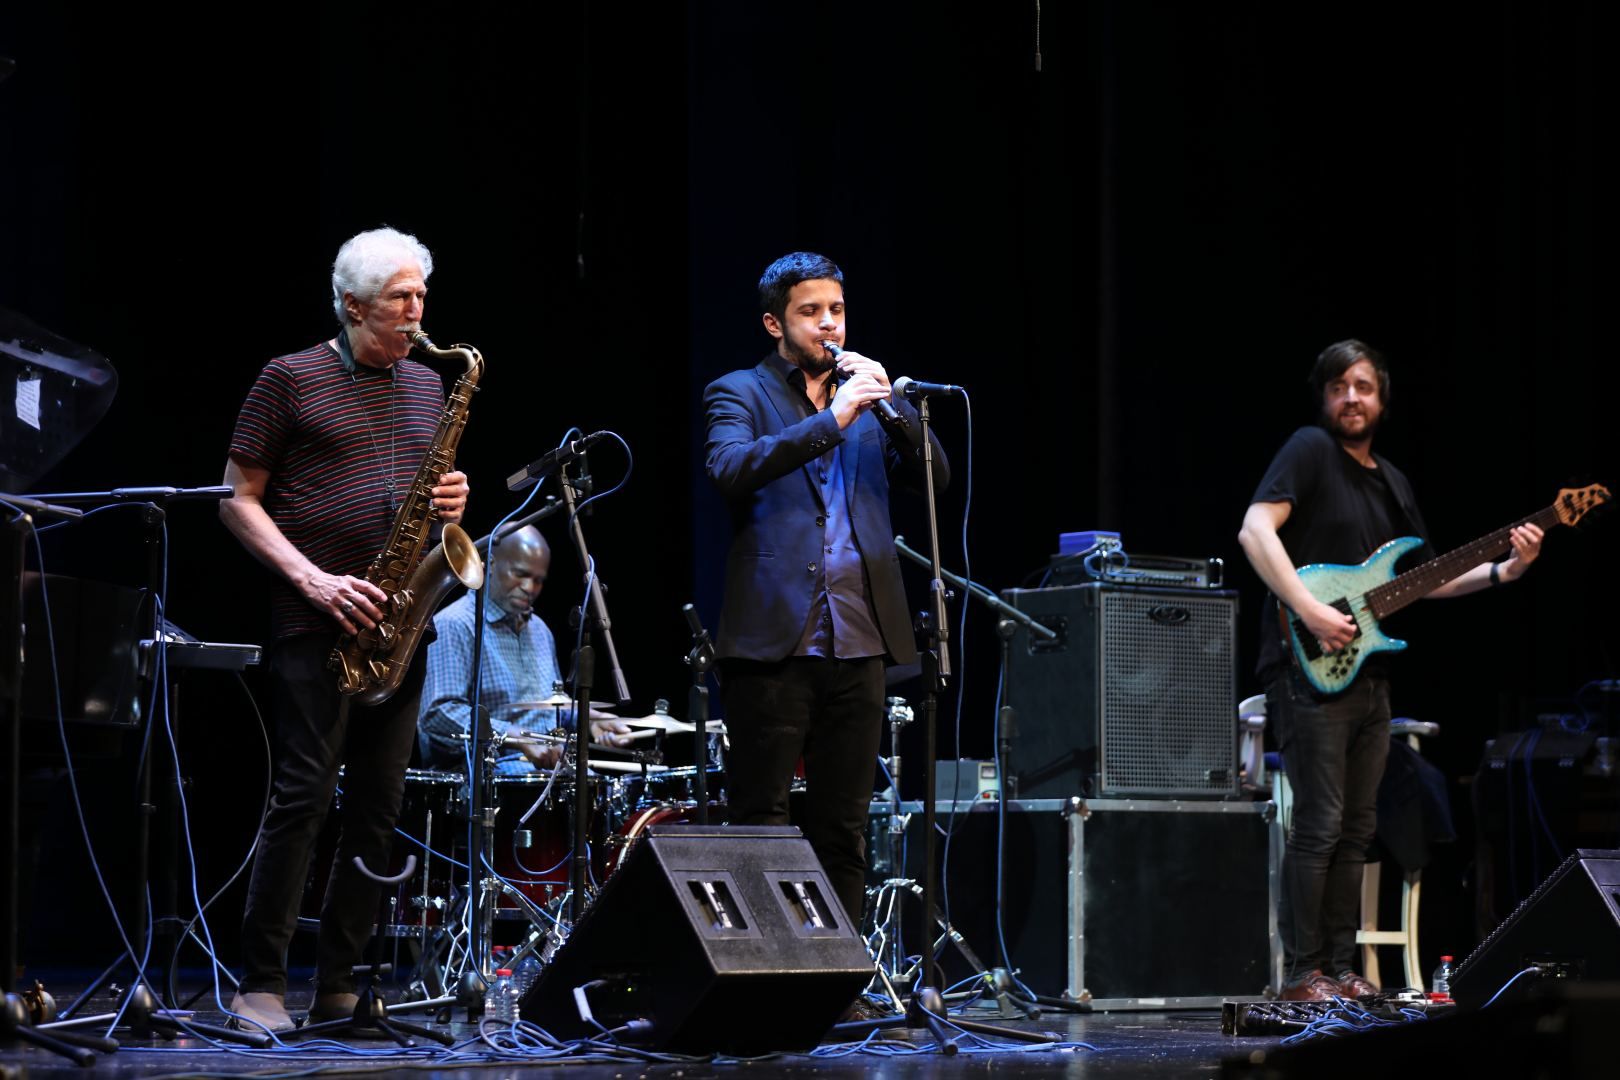 Grammy-winning jazz fusion band leaves crowd in awe [PHOTO/VIDEO]